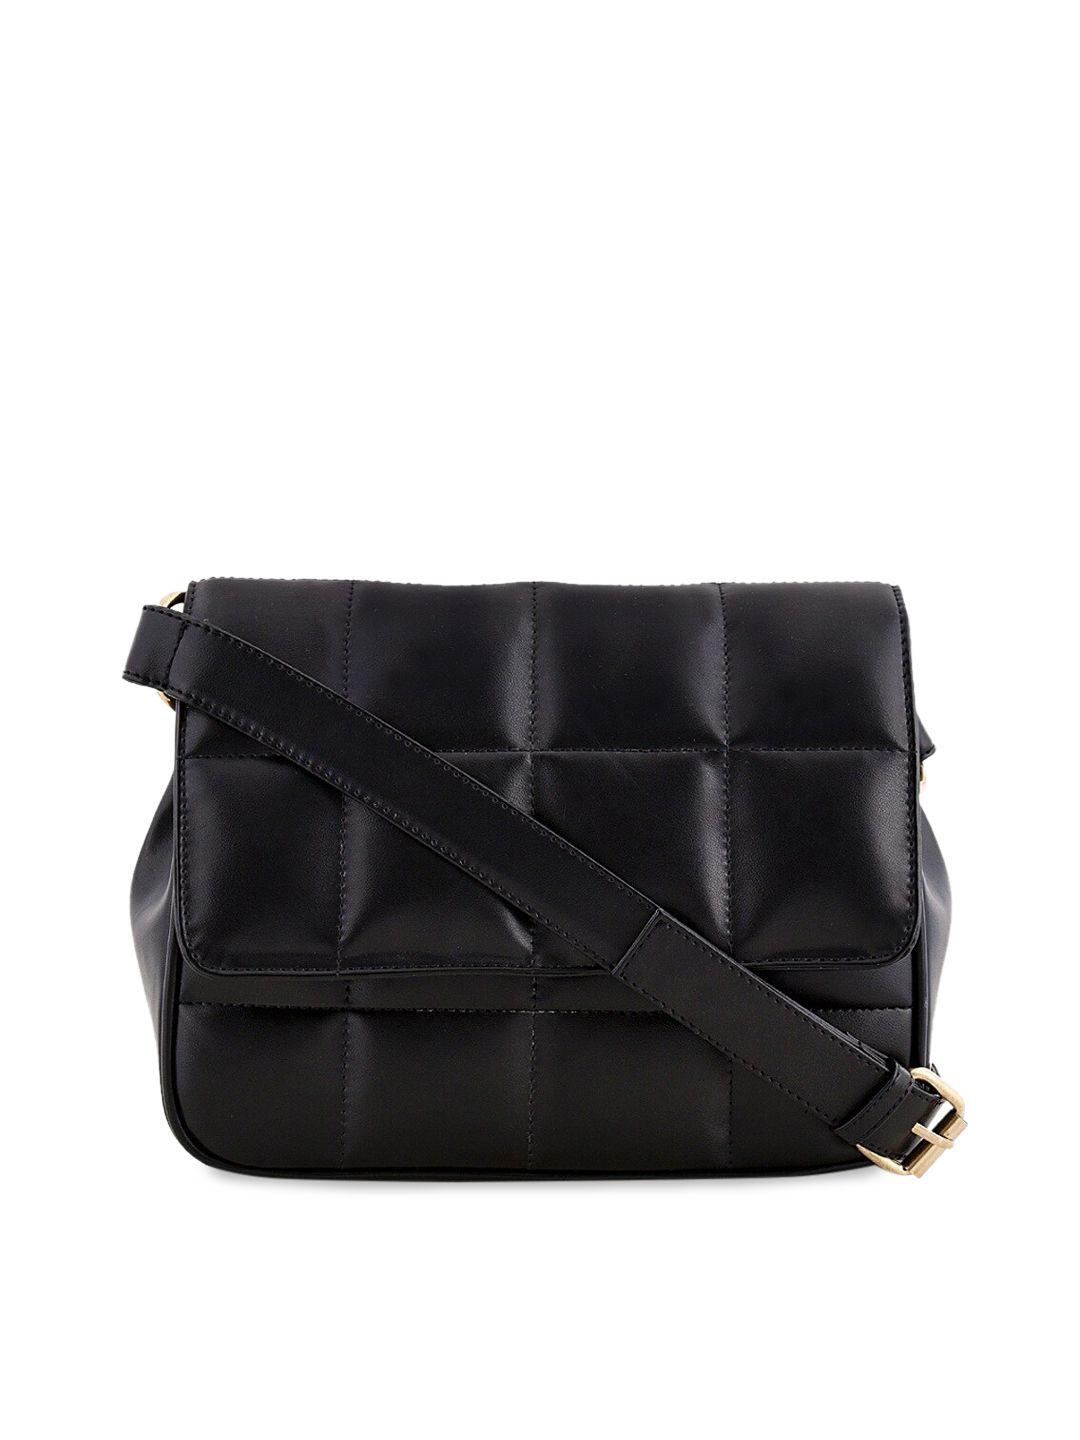 lychee bags black quilted sling bag